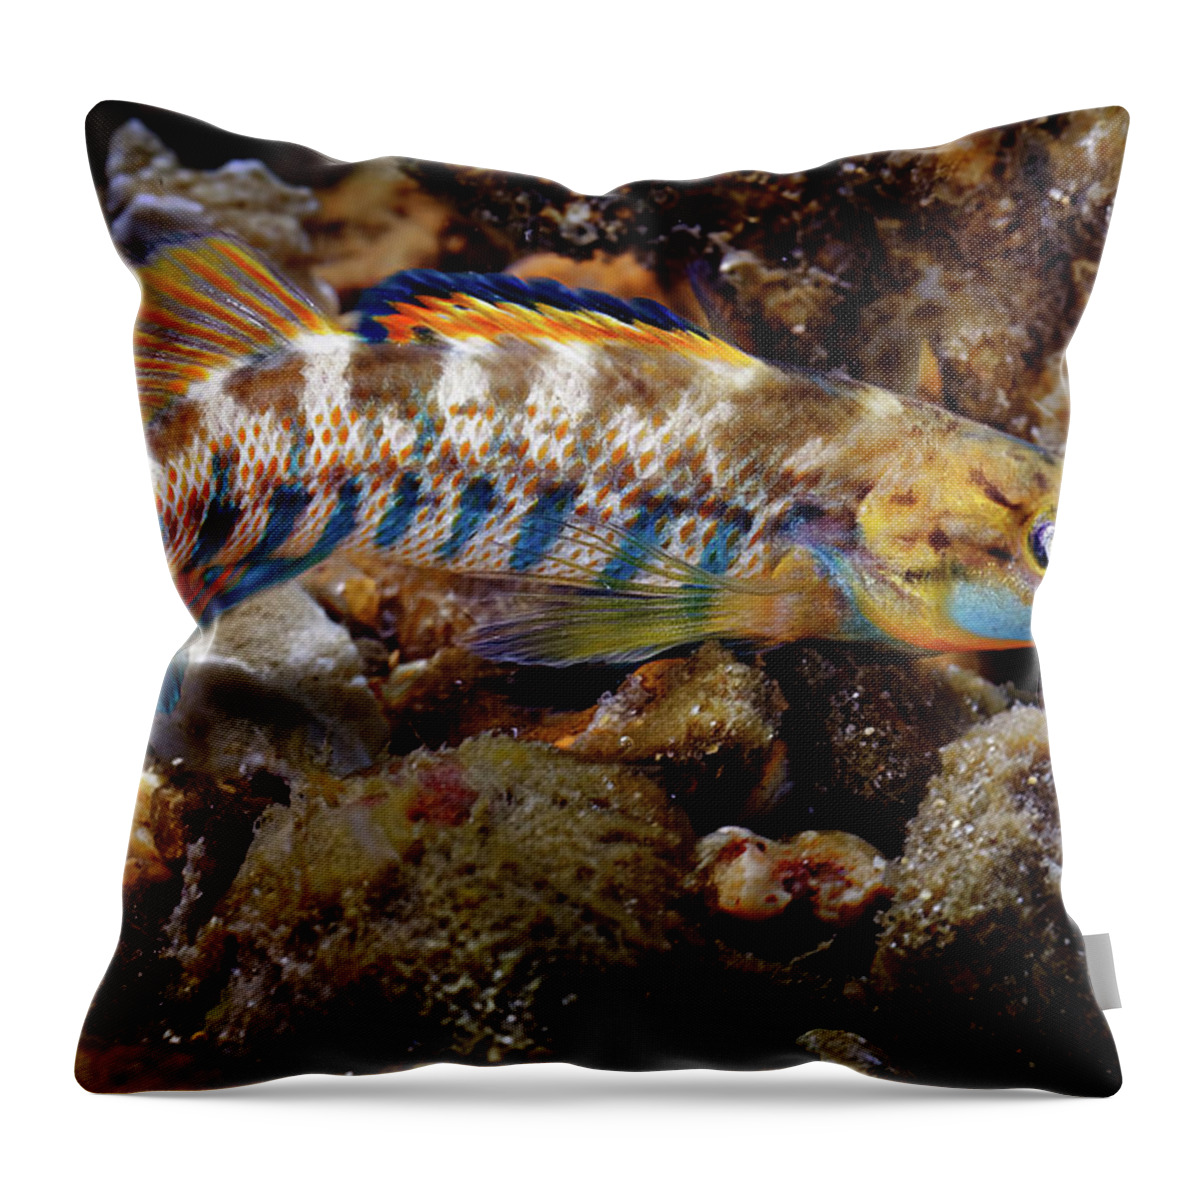 2016 Throw Pillow featuring the photograph Rainbow Darter by Robert Charity